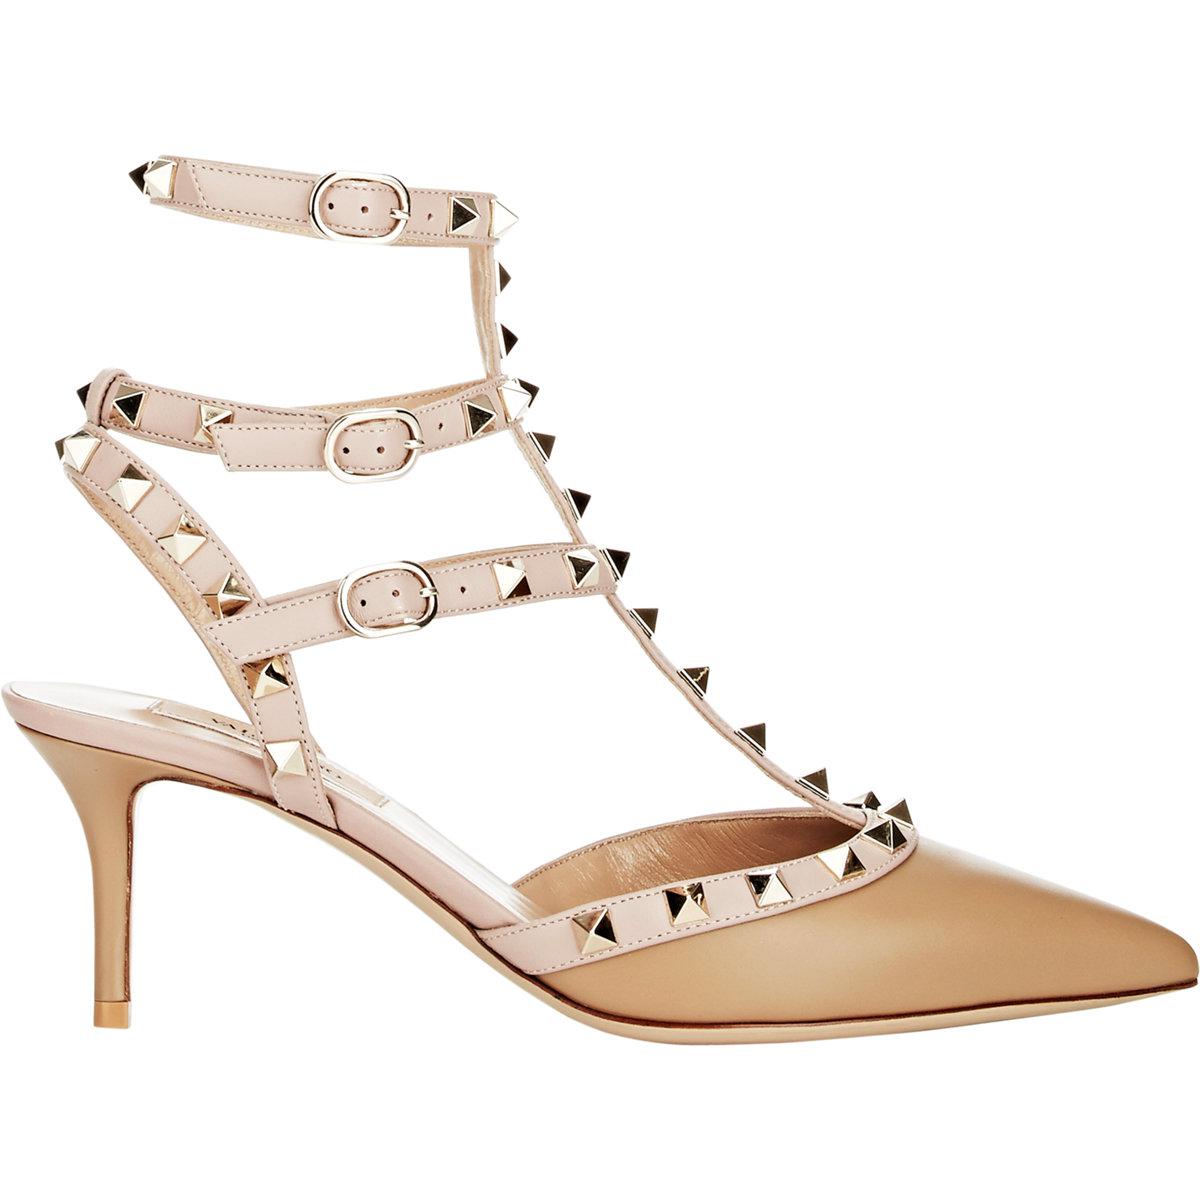 Valentino Leather Rockstud Caged Pumps in Tan (Metallic) - Lyst